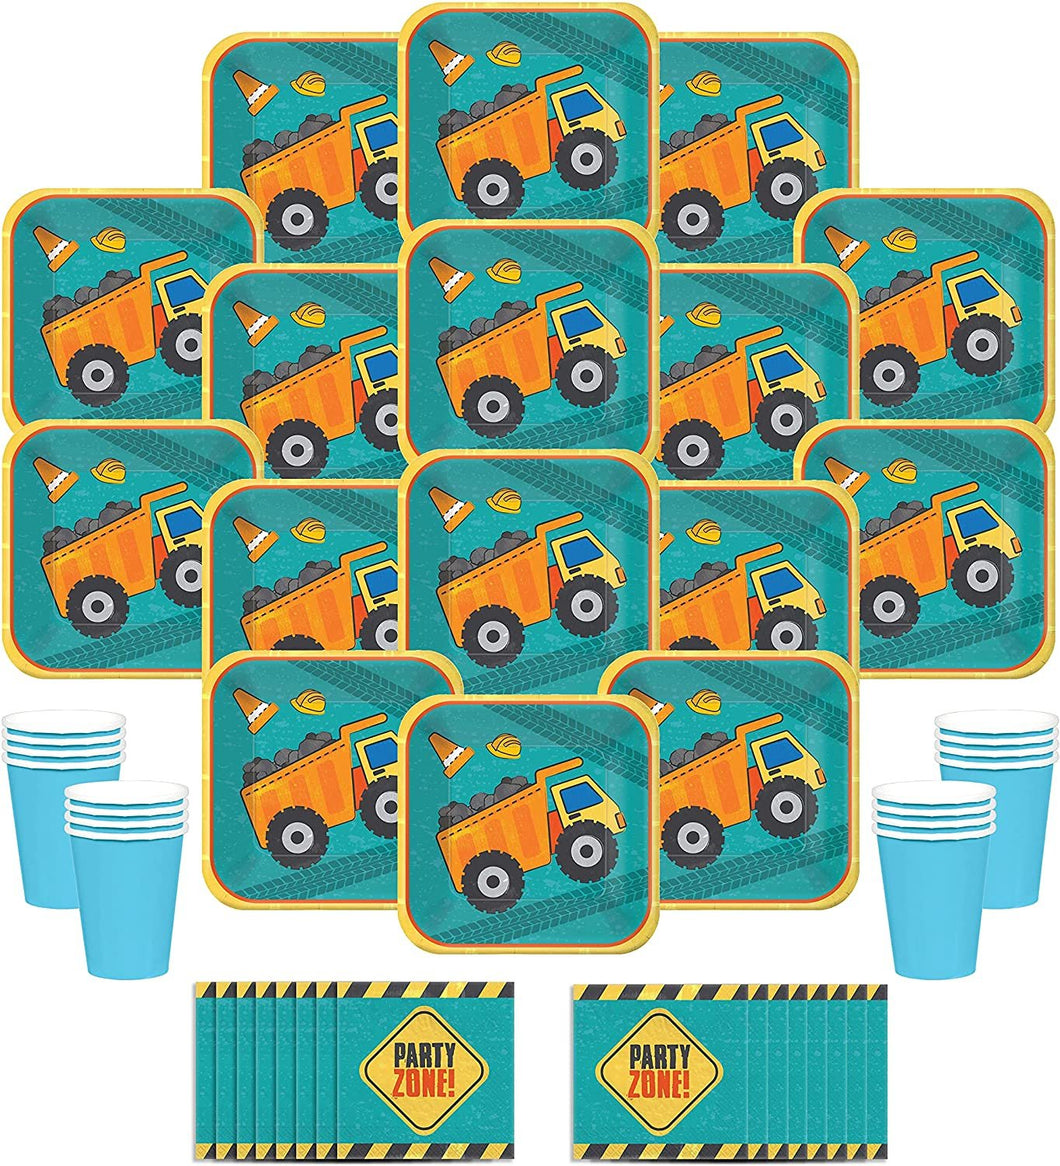 Construction Truck Party Decorations Supplies for 16 with Plates, Napkins, and Cups